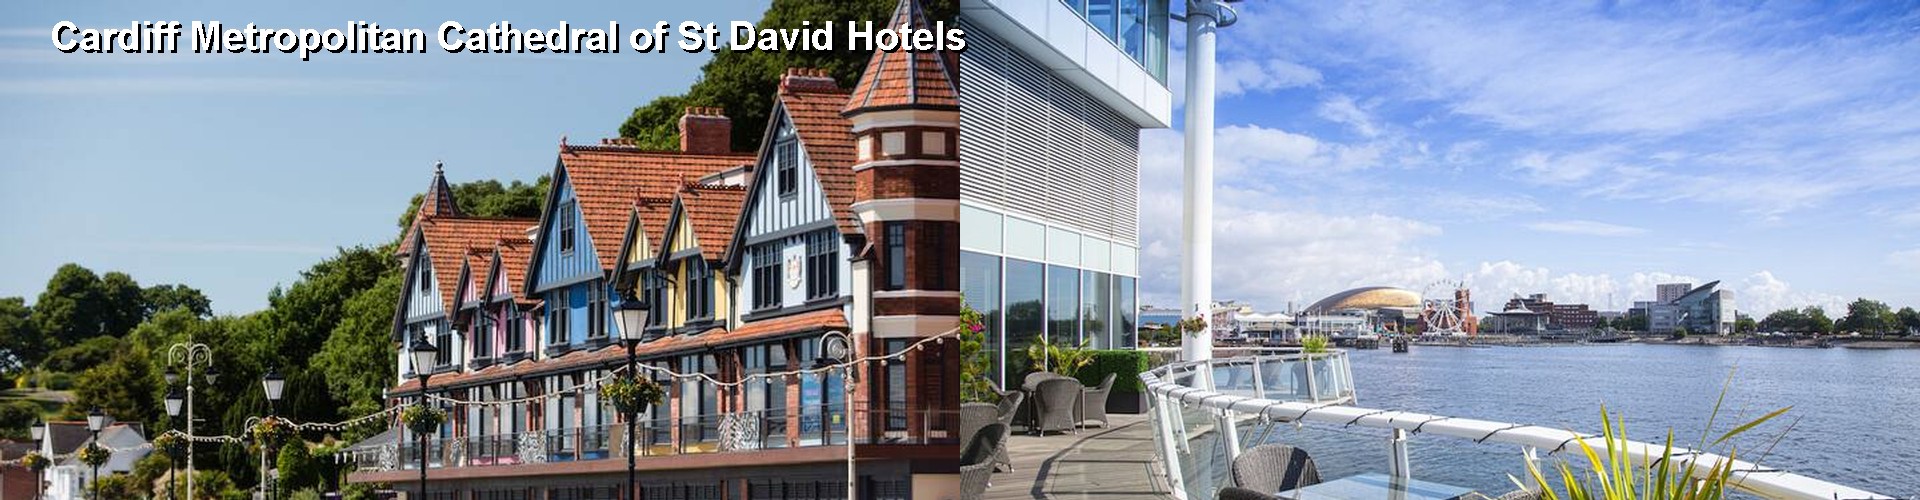 5 Best Hotels near Cardiff Metropolitan Cathedral of St David